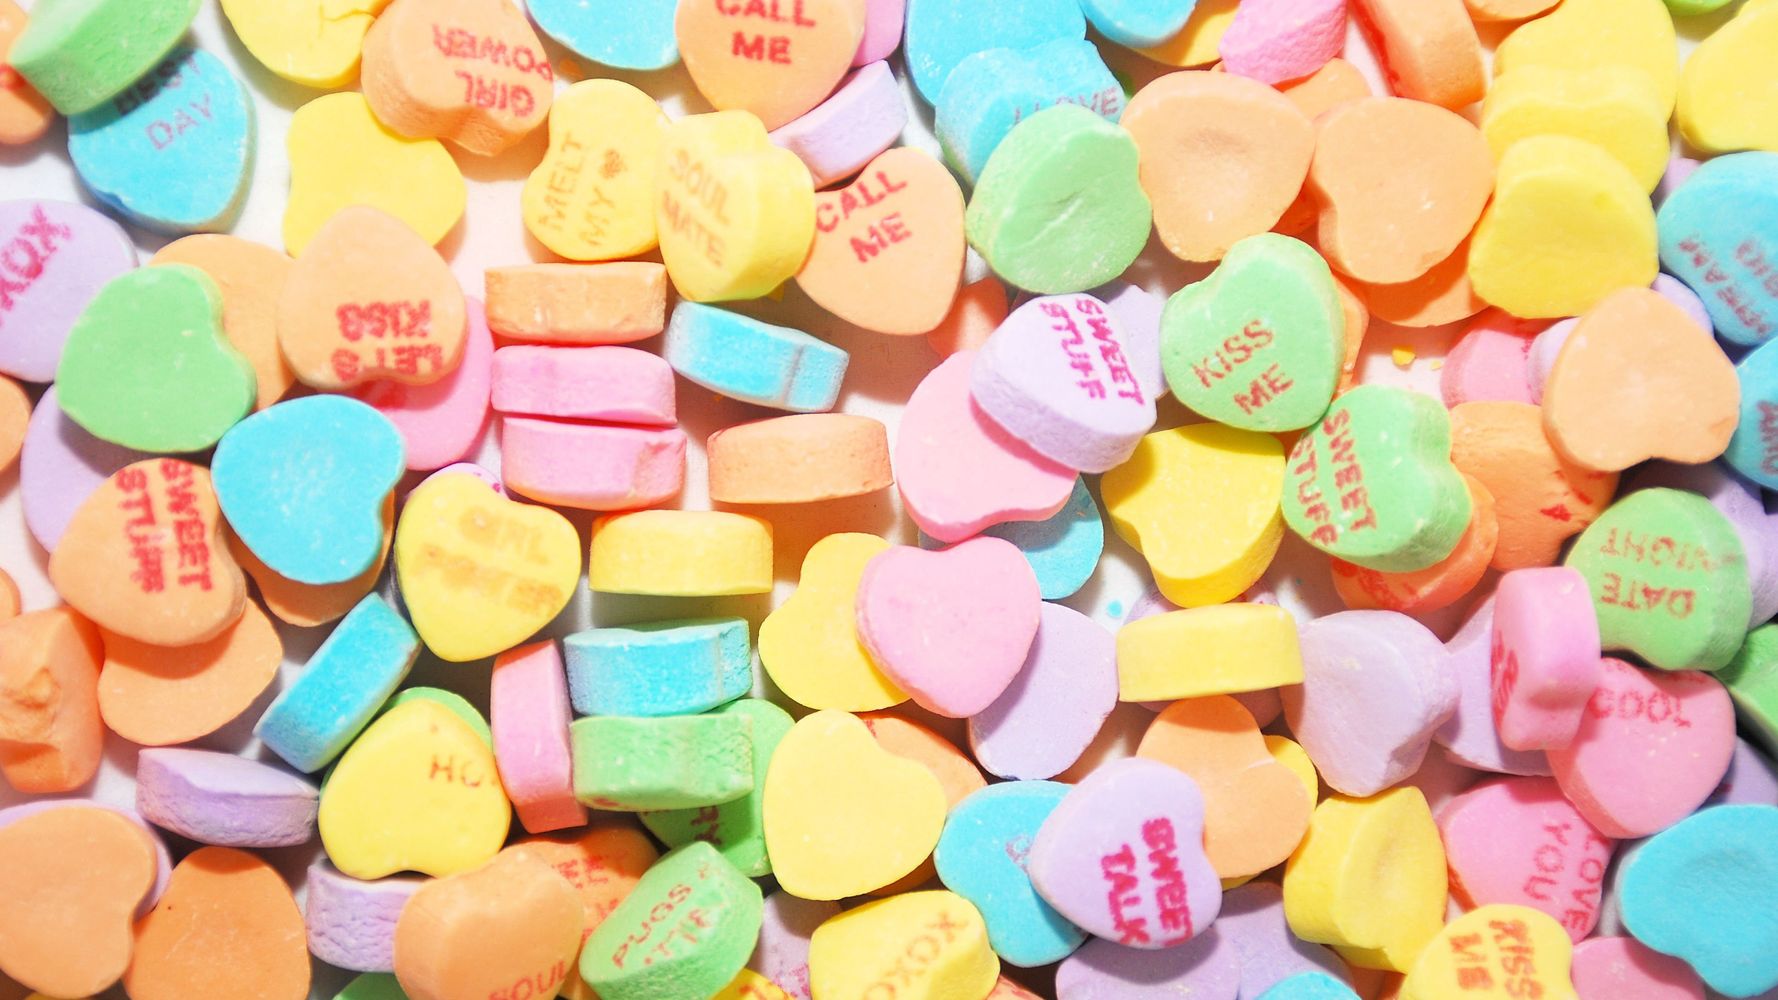 Where did those sweet candy heart sayings come from? (1920s to